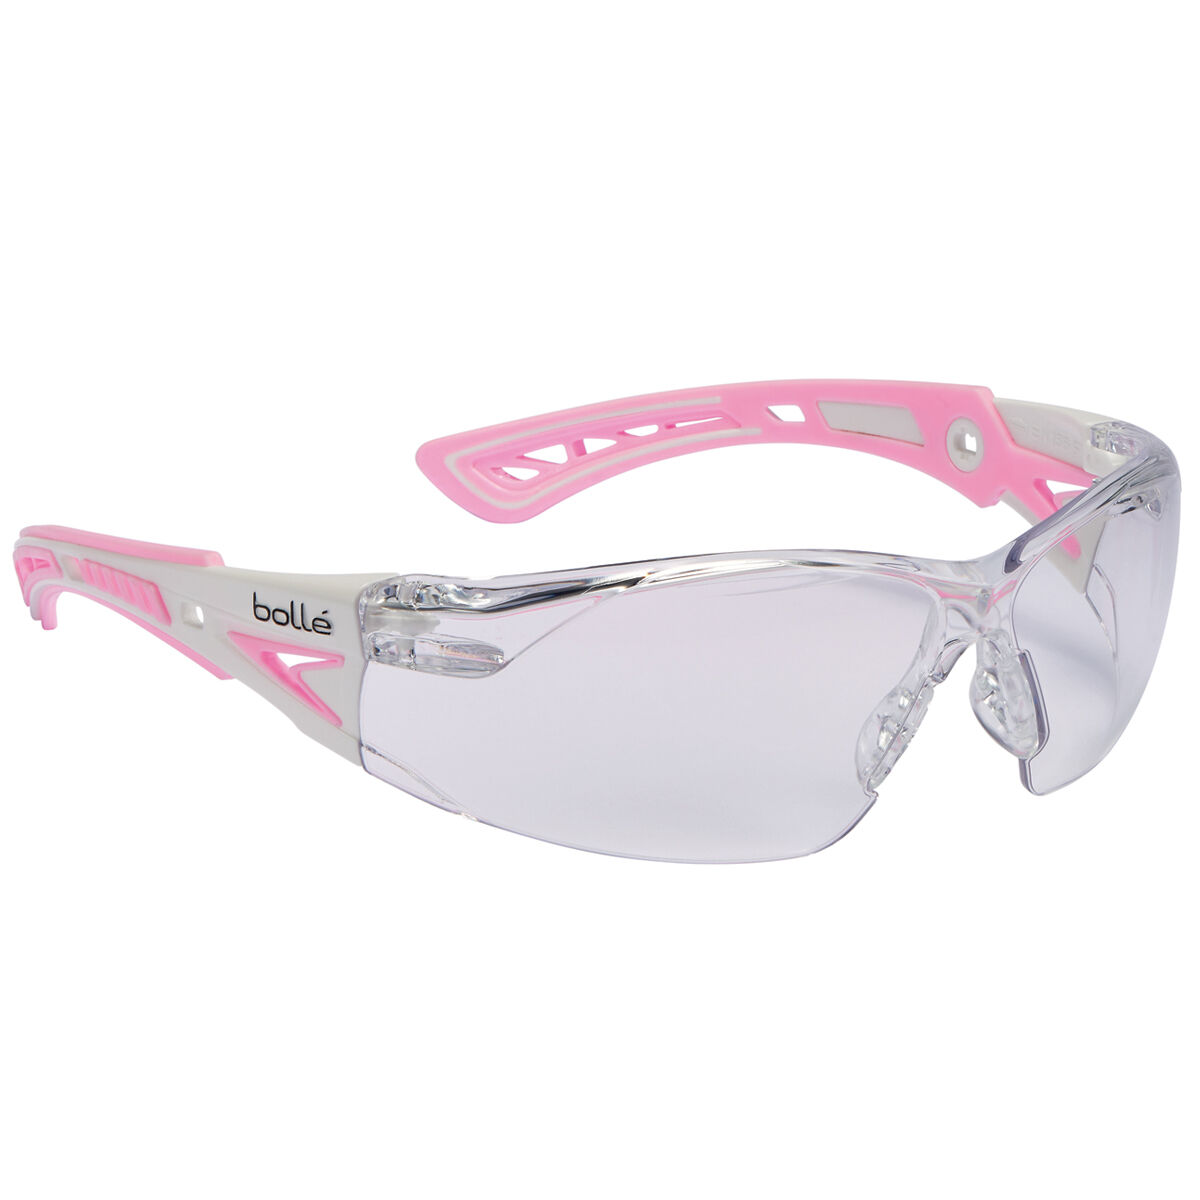 Small Pink and White Frame Clear/Smoke Lens BOLLE RUSH PLUS Safety Glasses 